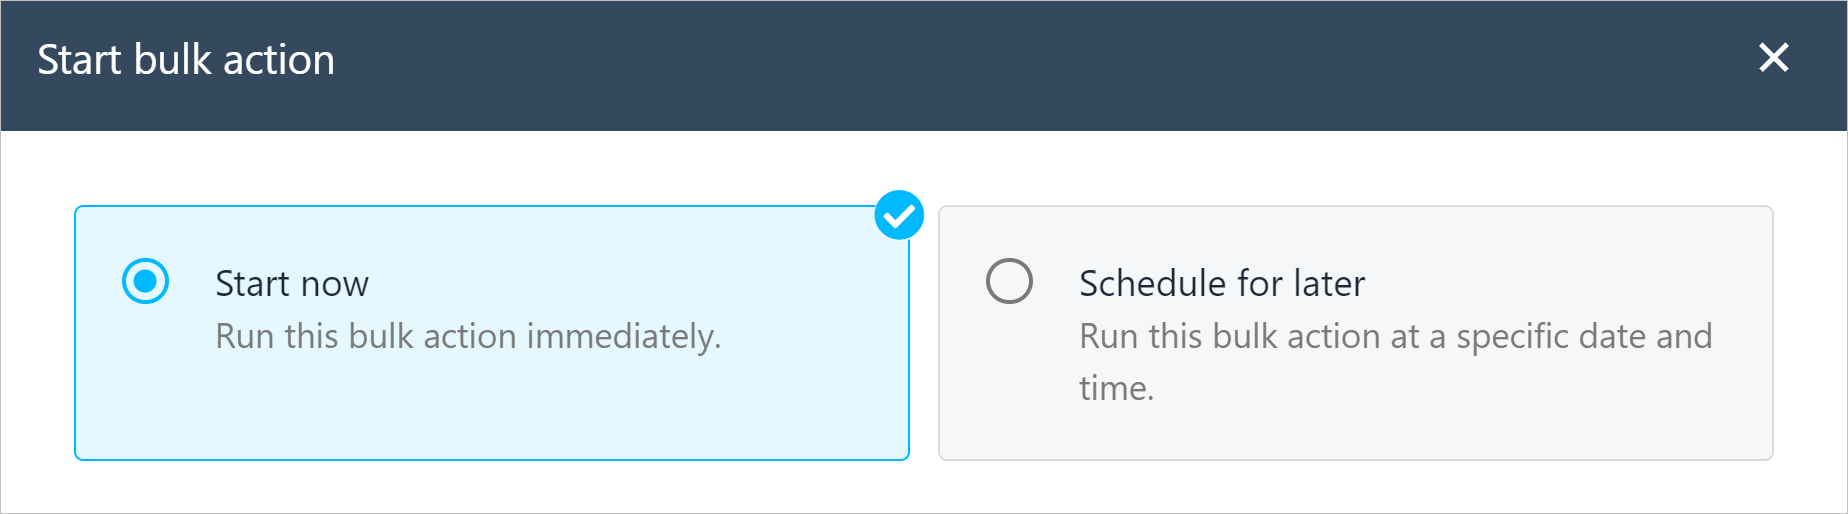 Choose Start now or Schedule for later